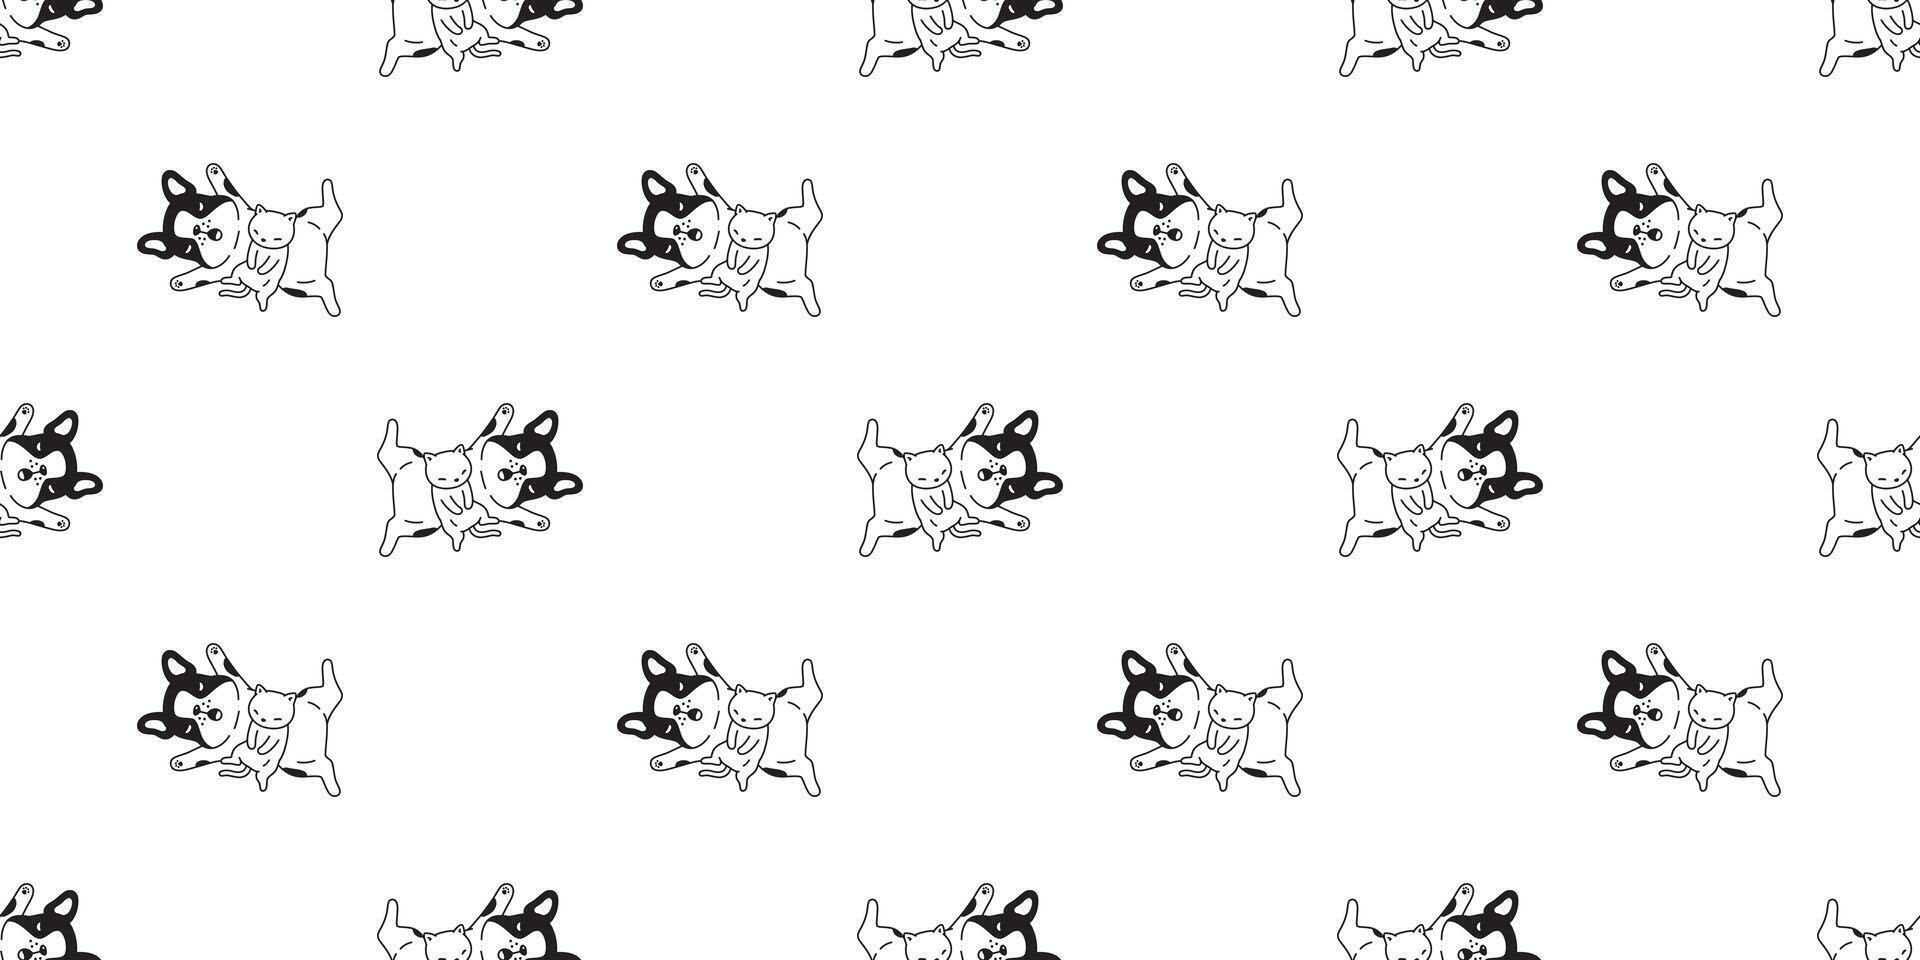 dog cat french bulldog seamless pattern kitten calico sleeping cartoon tile background repeat wallpaper scarf isolated illustration design vector